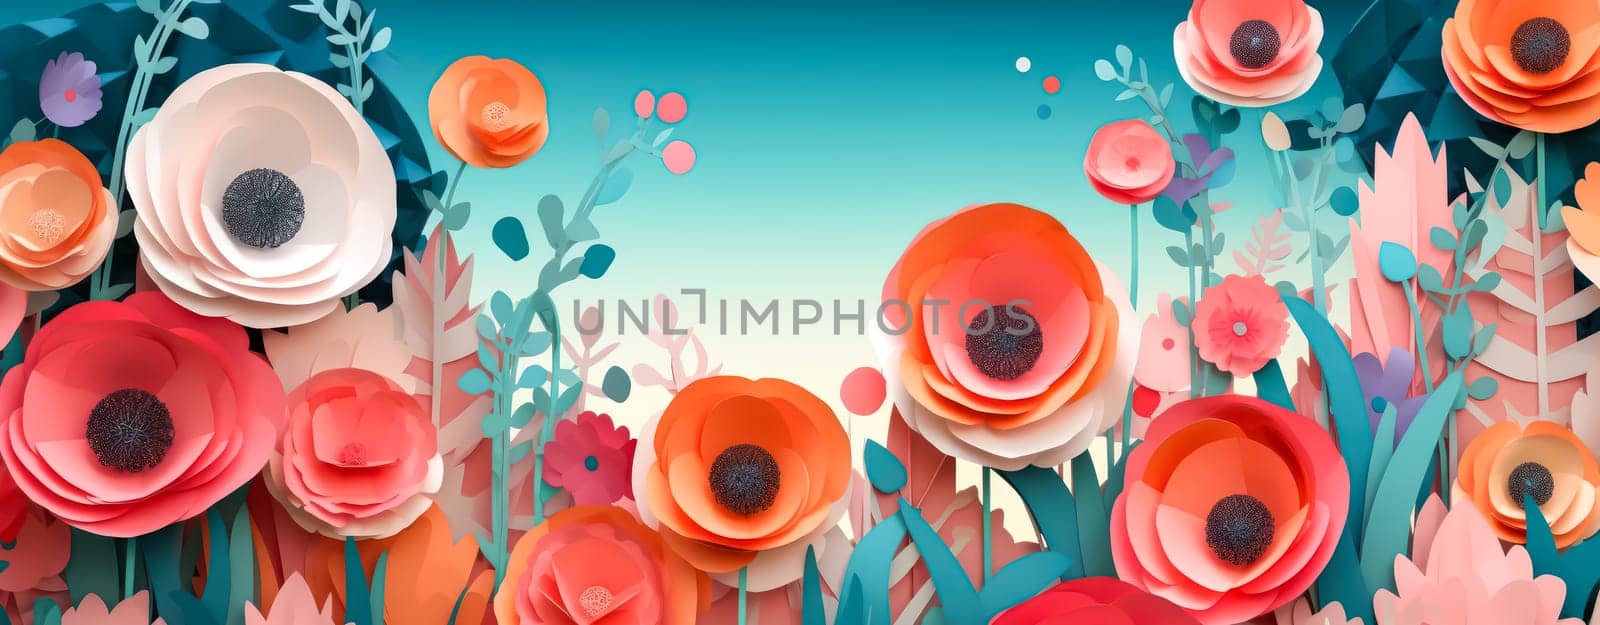 A vibrant display of paper flowers, creating a lively and festive floral background by Alla_Morozova93